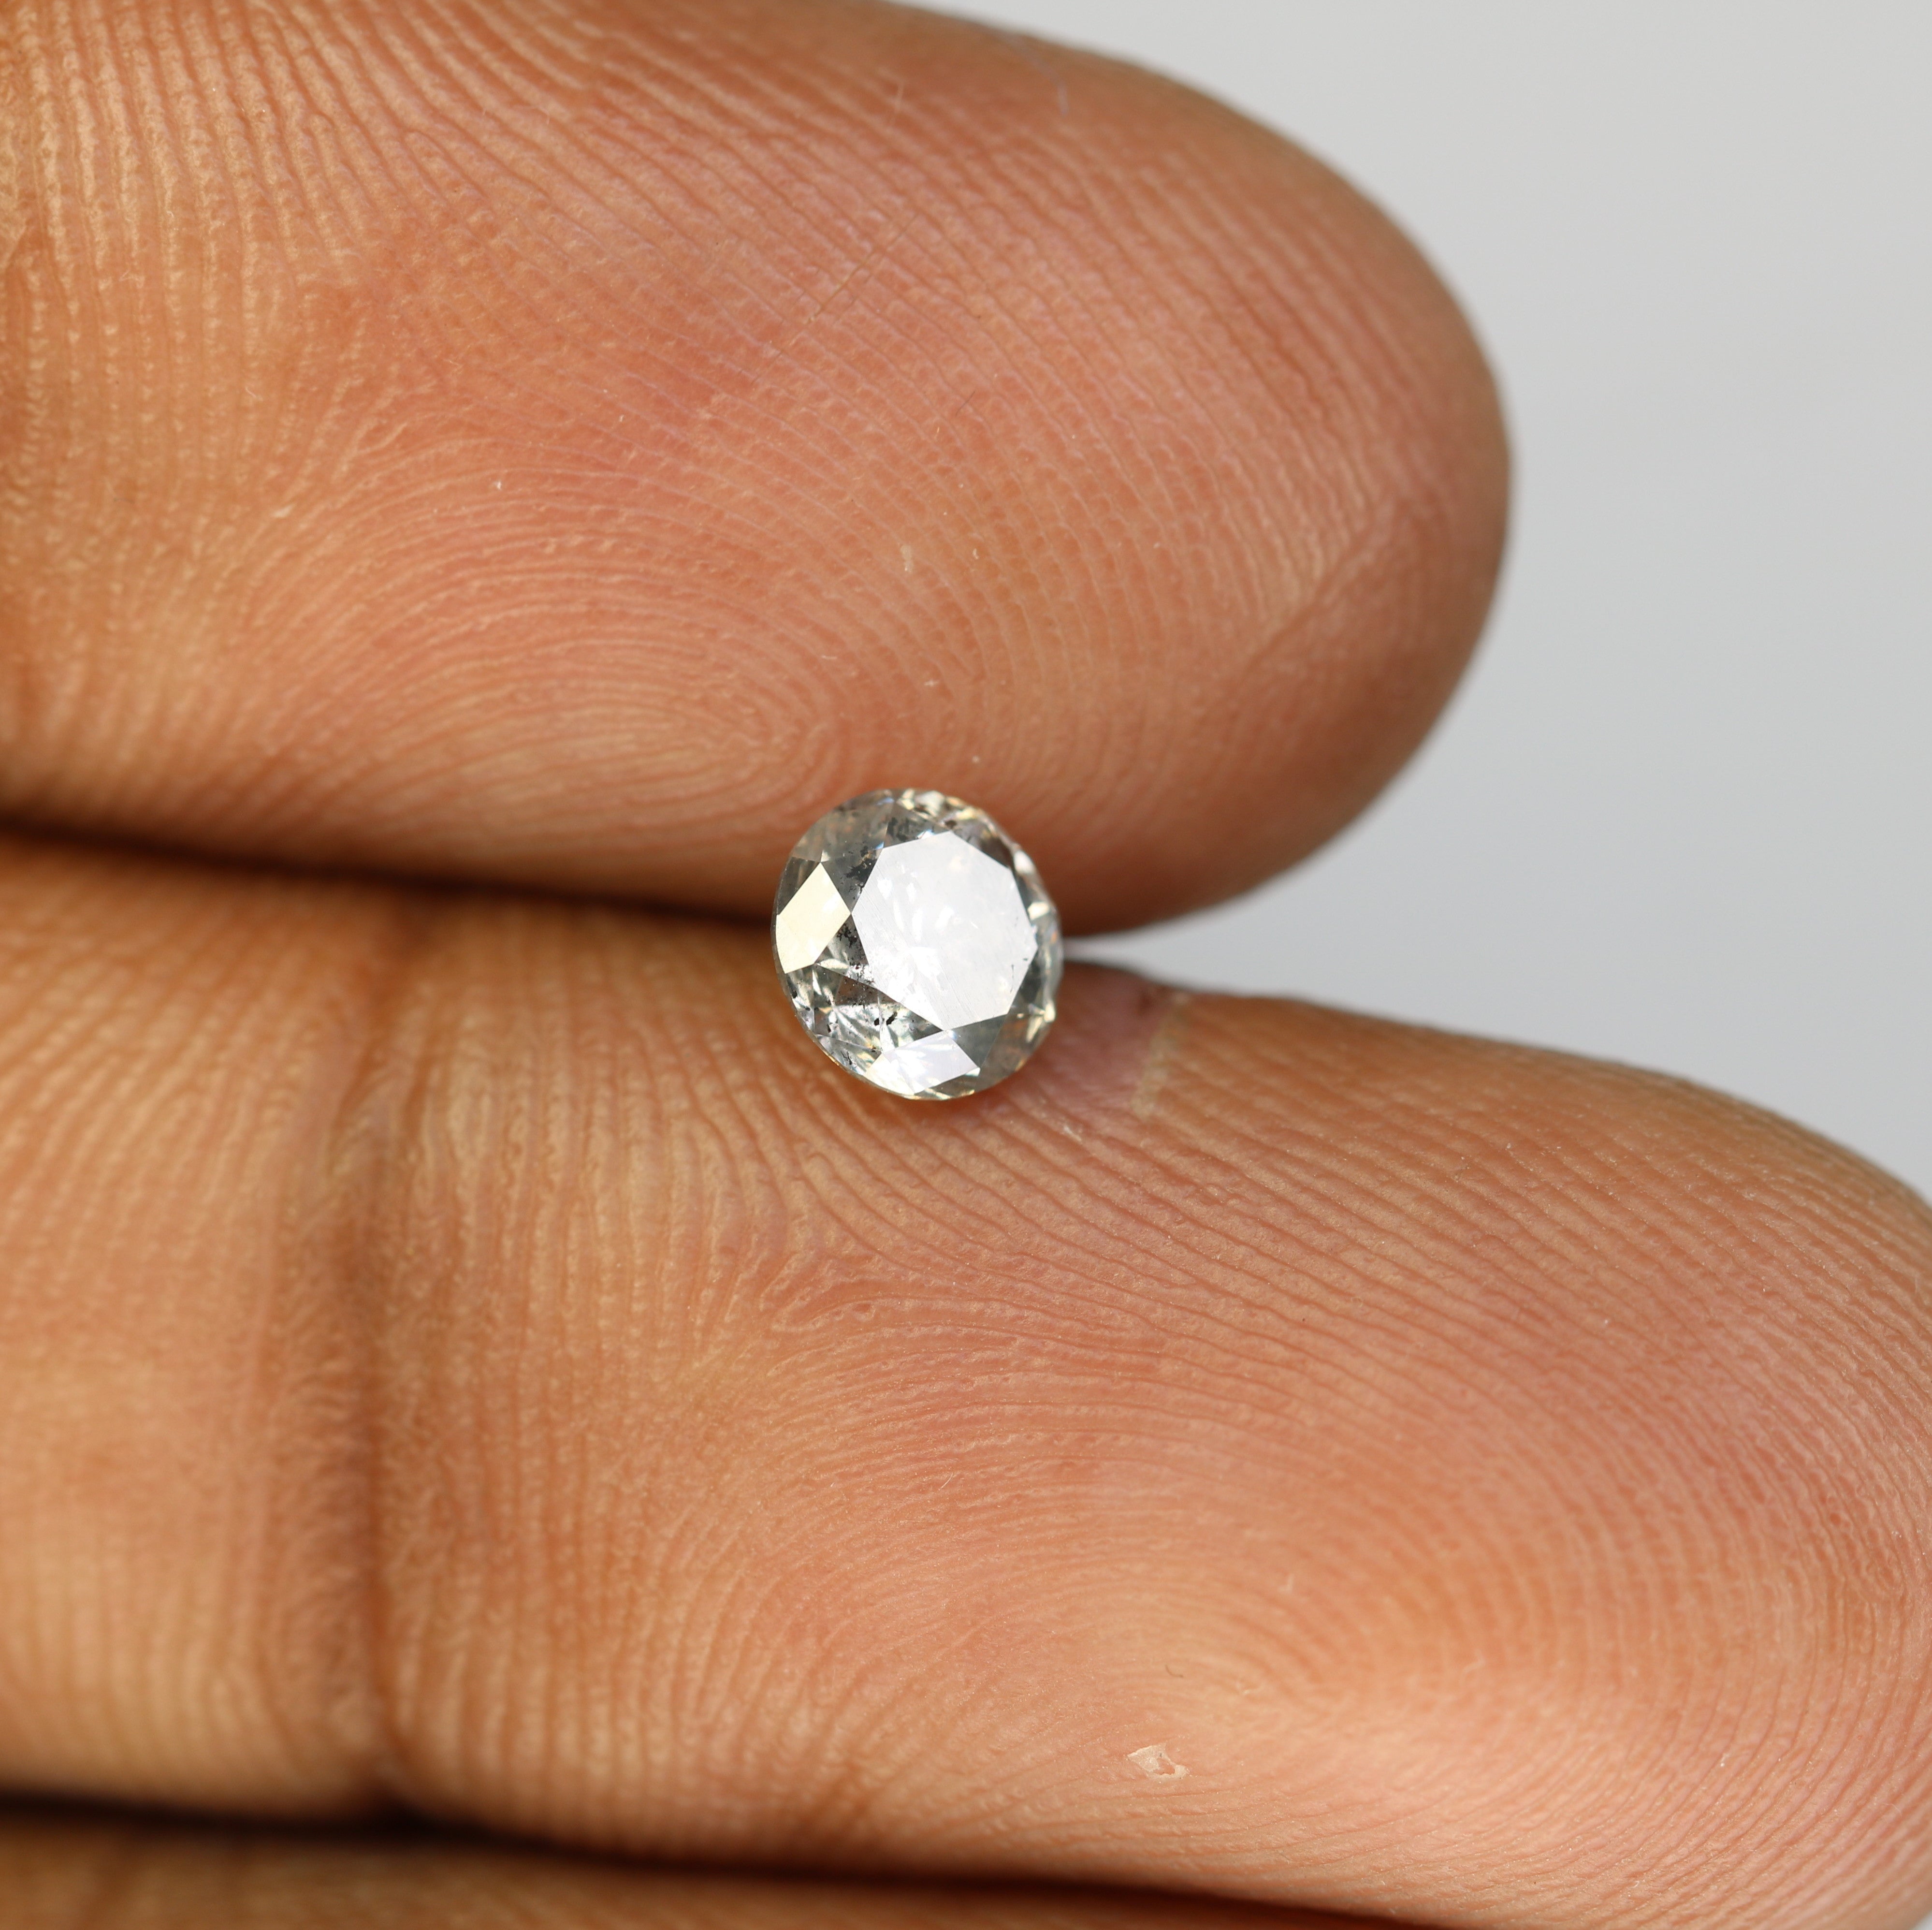 0.69 Carat Loose Round Brilliant Cut salt And Pepper Diamond For Galaxy Ring